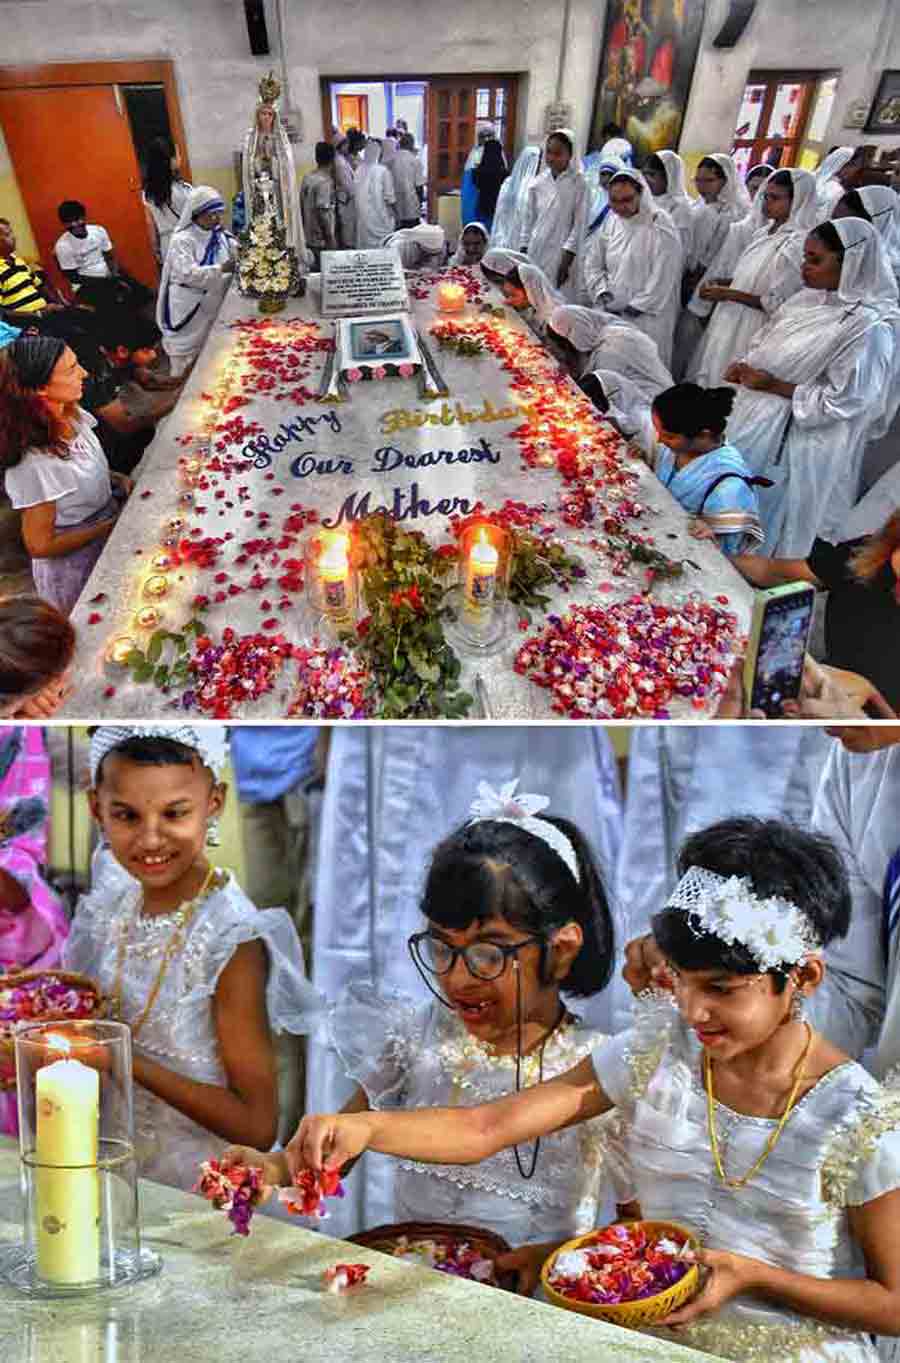 Nuns of the Missionaries of Charity and children offer prayers to Mother Teresa at Mother House on her 113th birth anniversary on Saturday